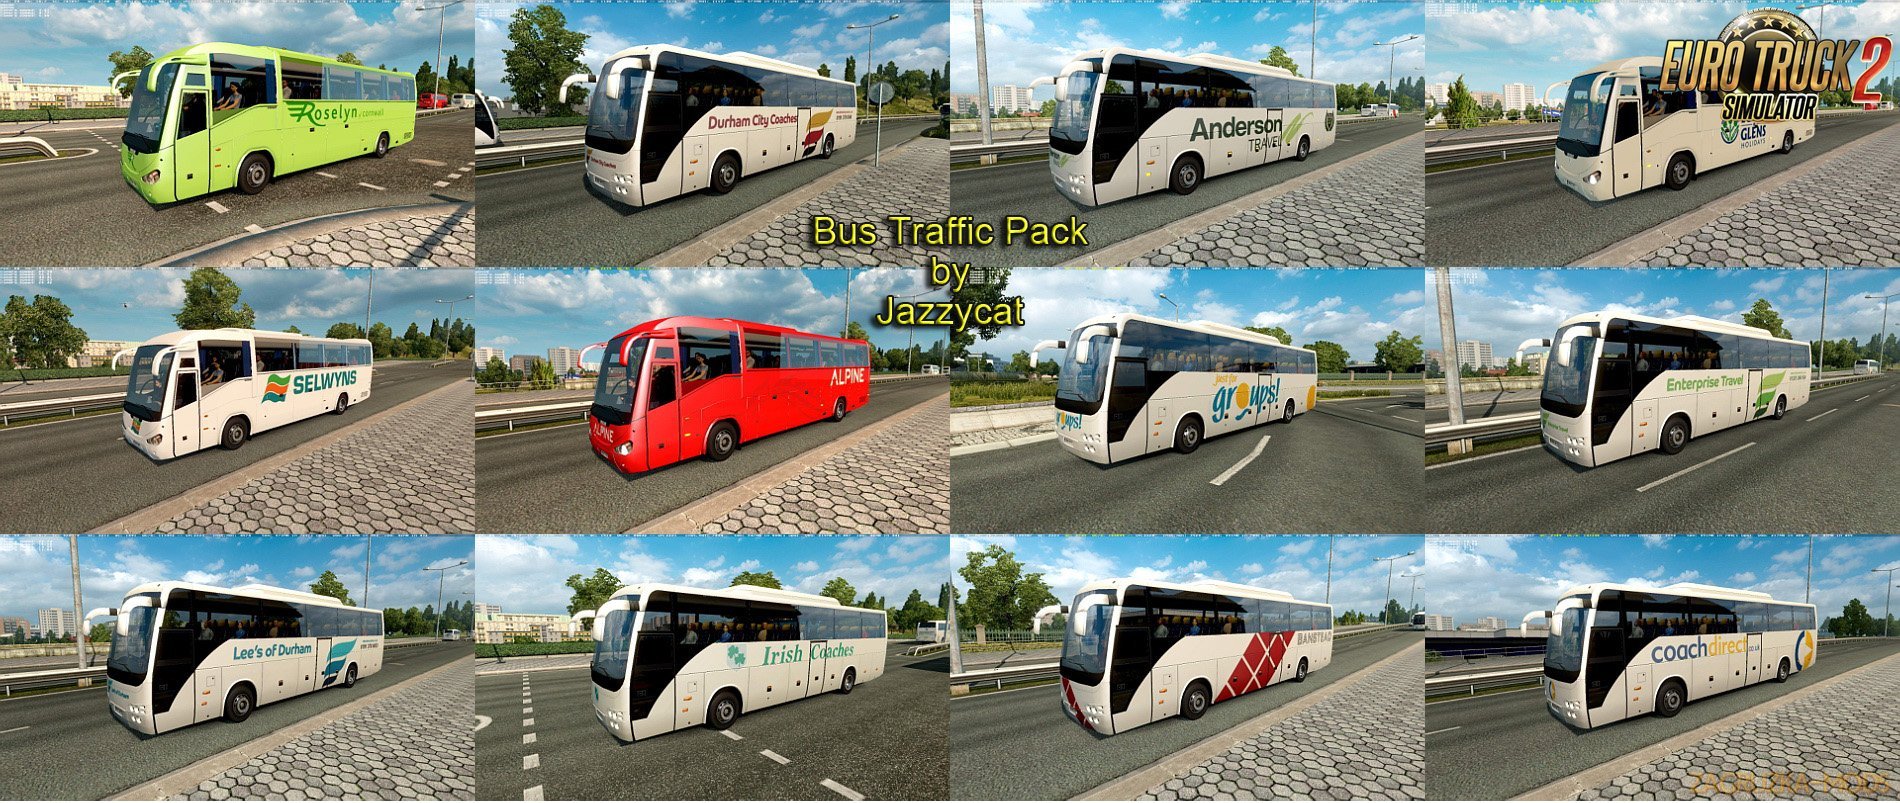 Bus Traffic Pack v3.0.1 by Jazzycat